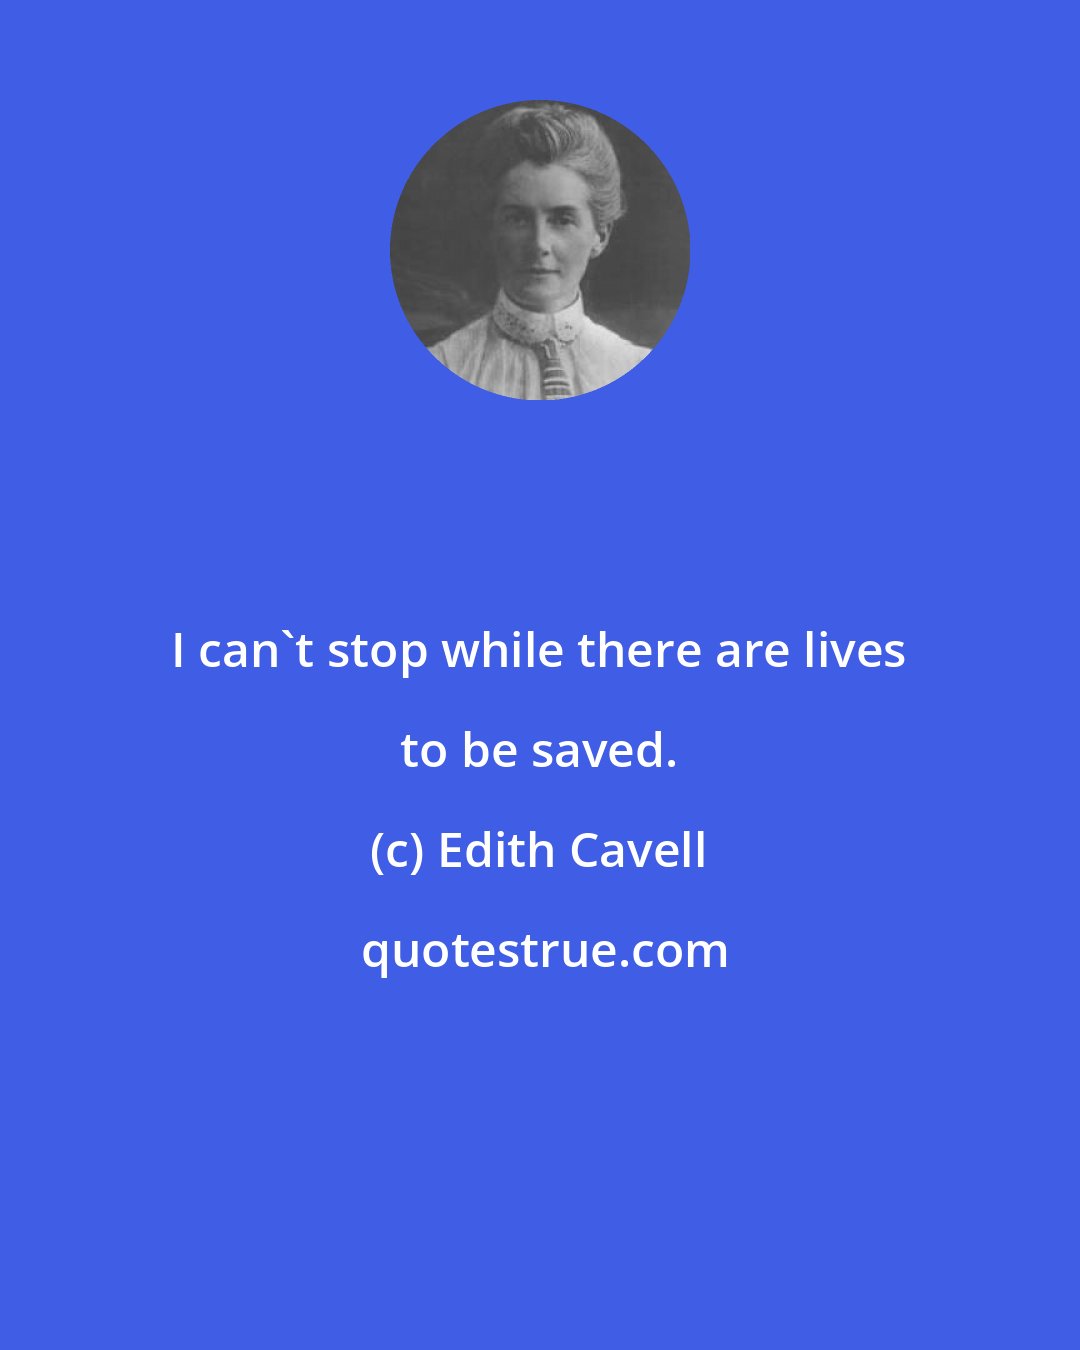 Edith Cavell: I can't stop while there are lives to be saved.